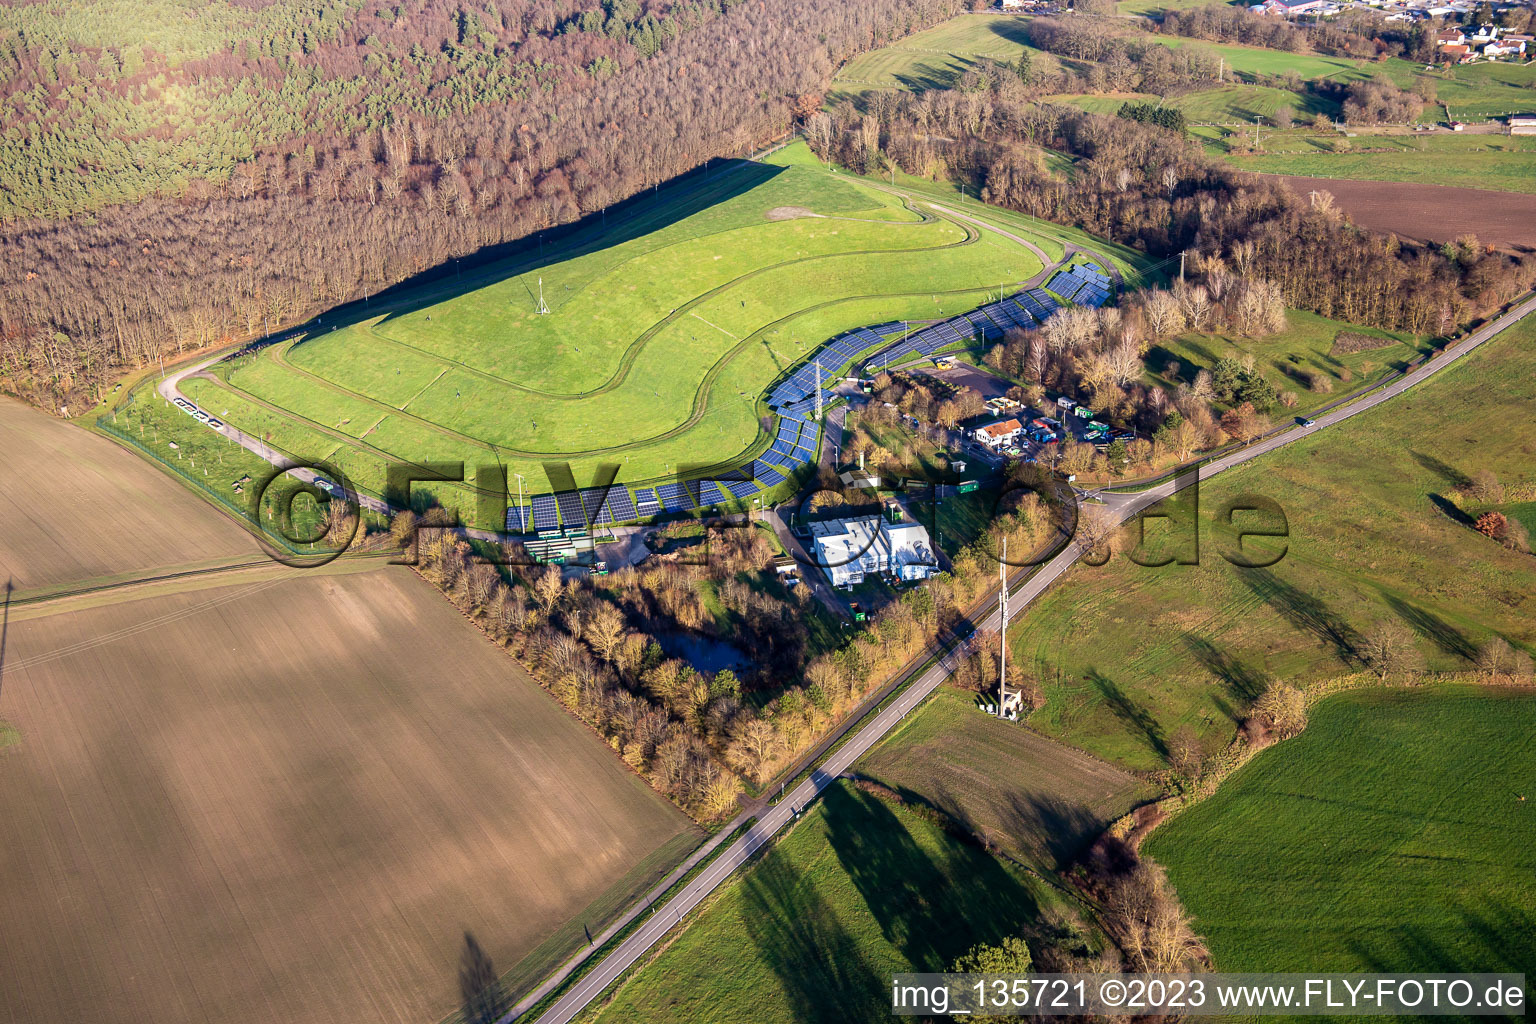 Aerial view of Landfill in Berg in the state Rhineland-Palatinate, Germany